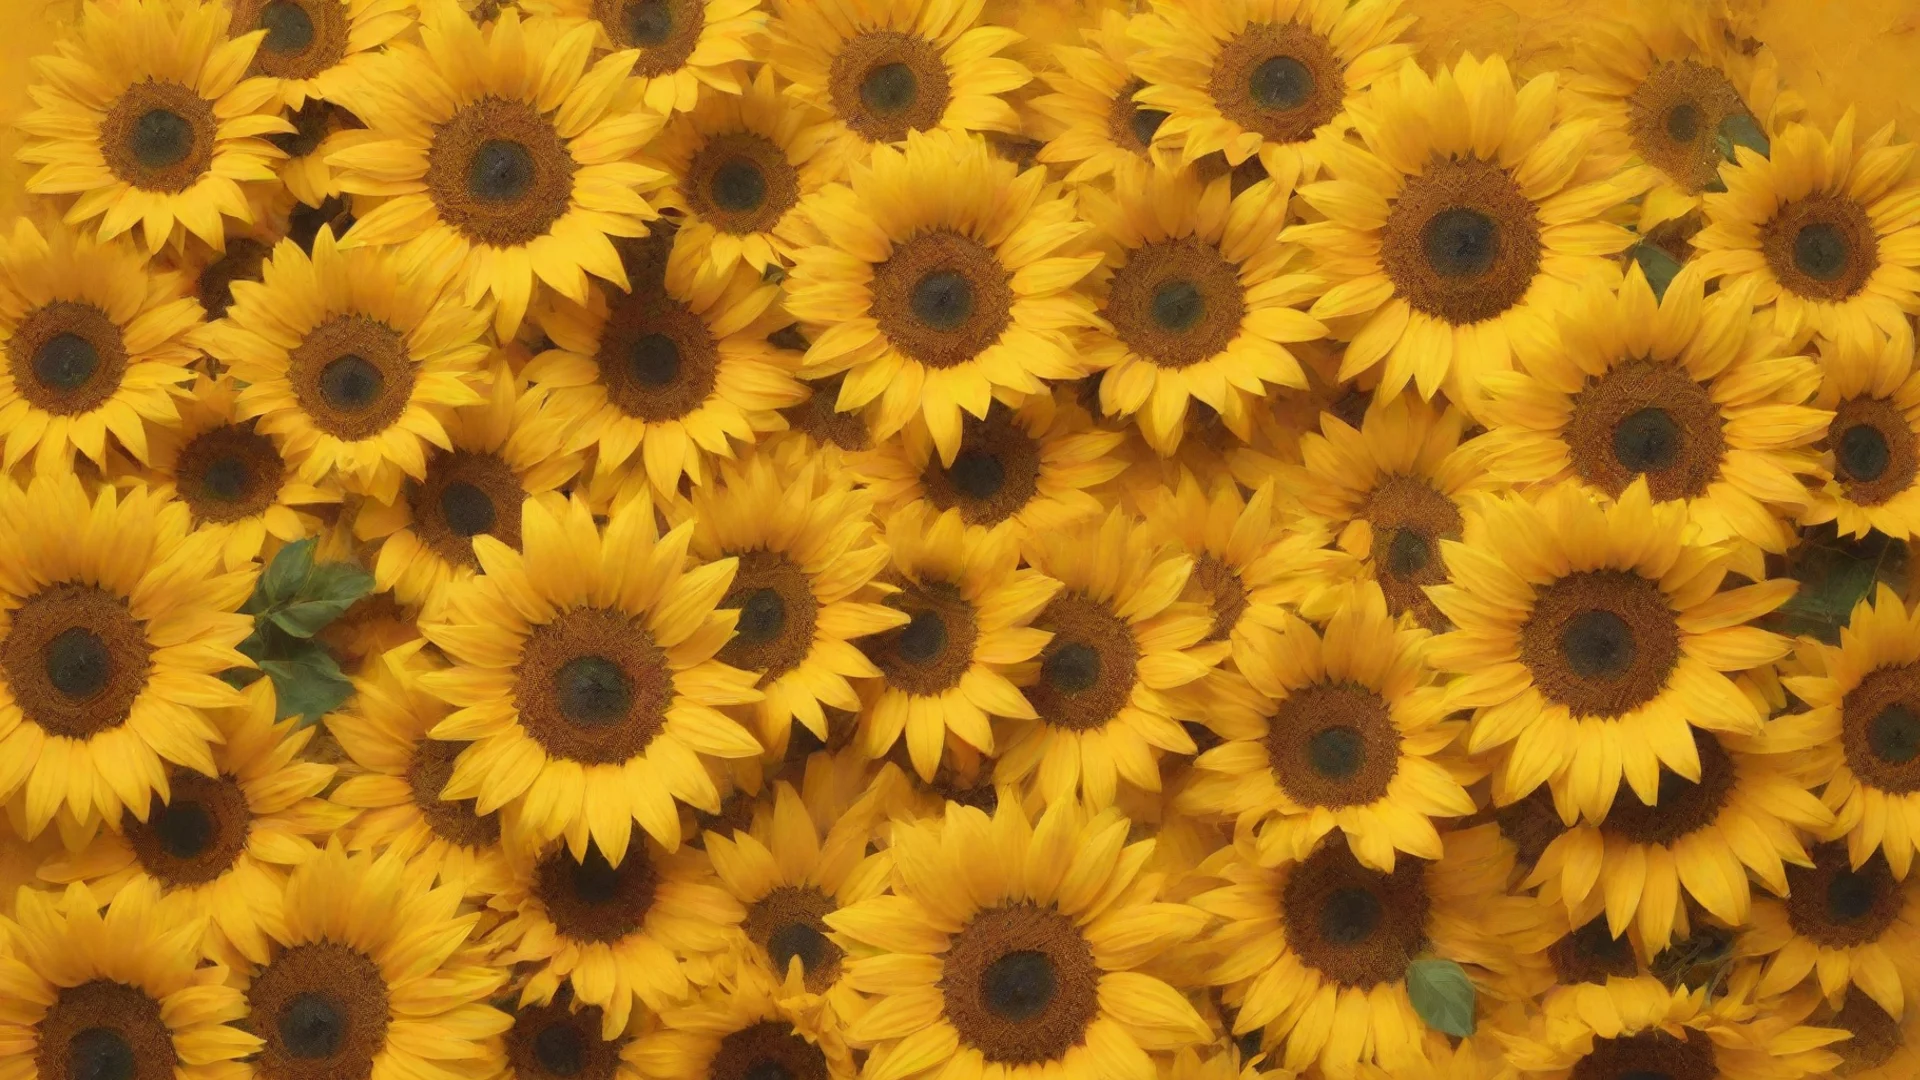 trending swirling yellow background with sunflowers strewn about good looking fantastic 1 wide